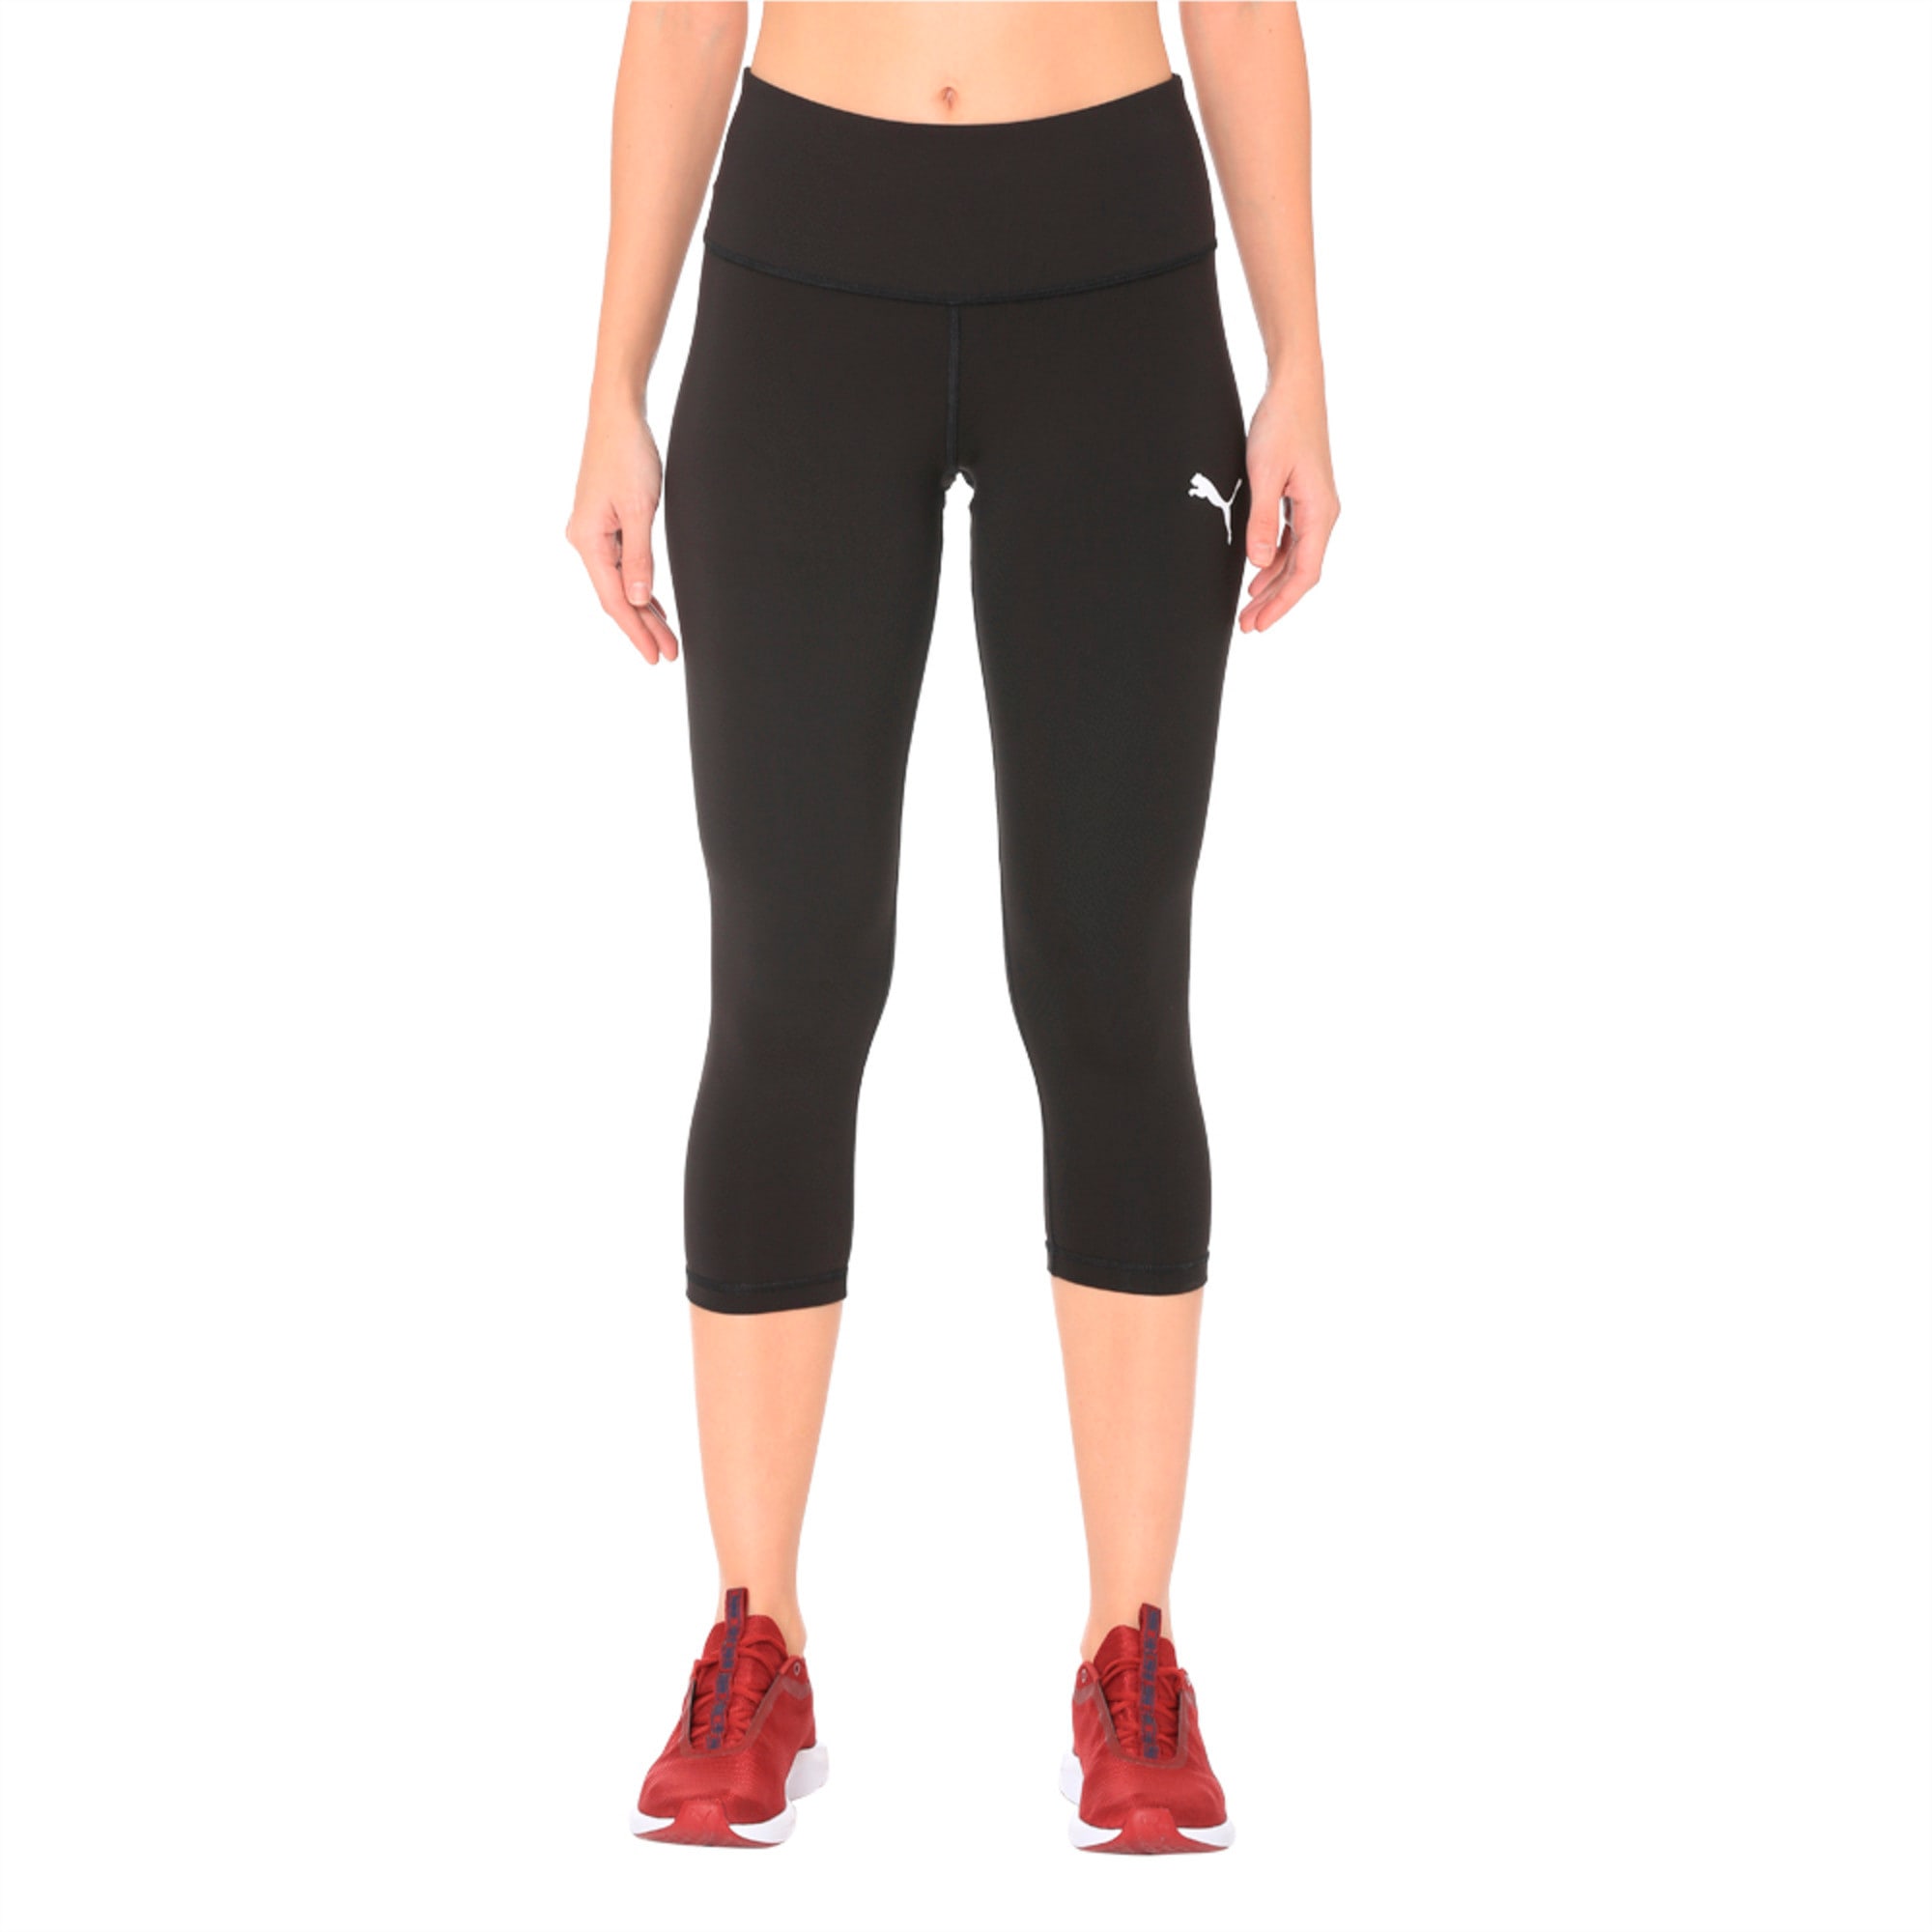 Active 3/4 dryCELL Women's Leggings 